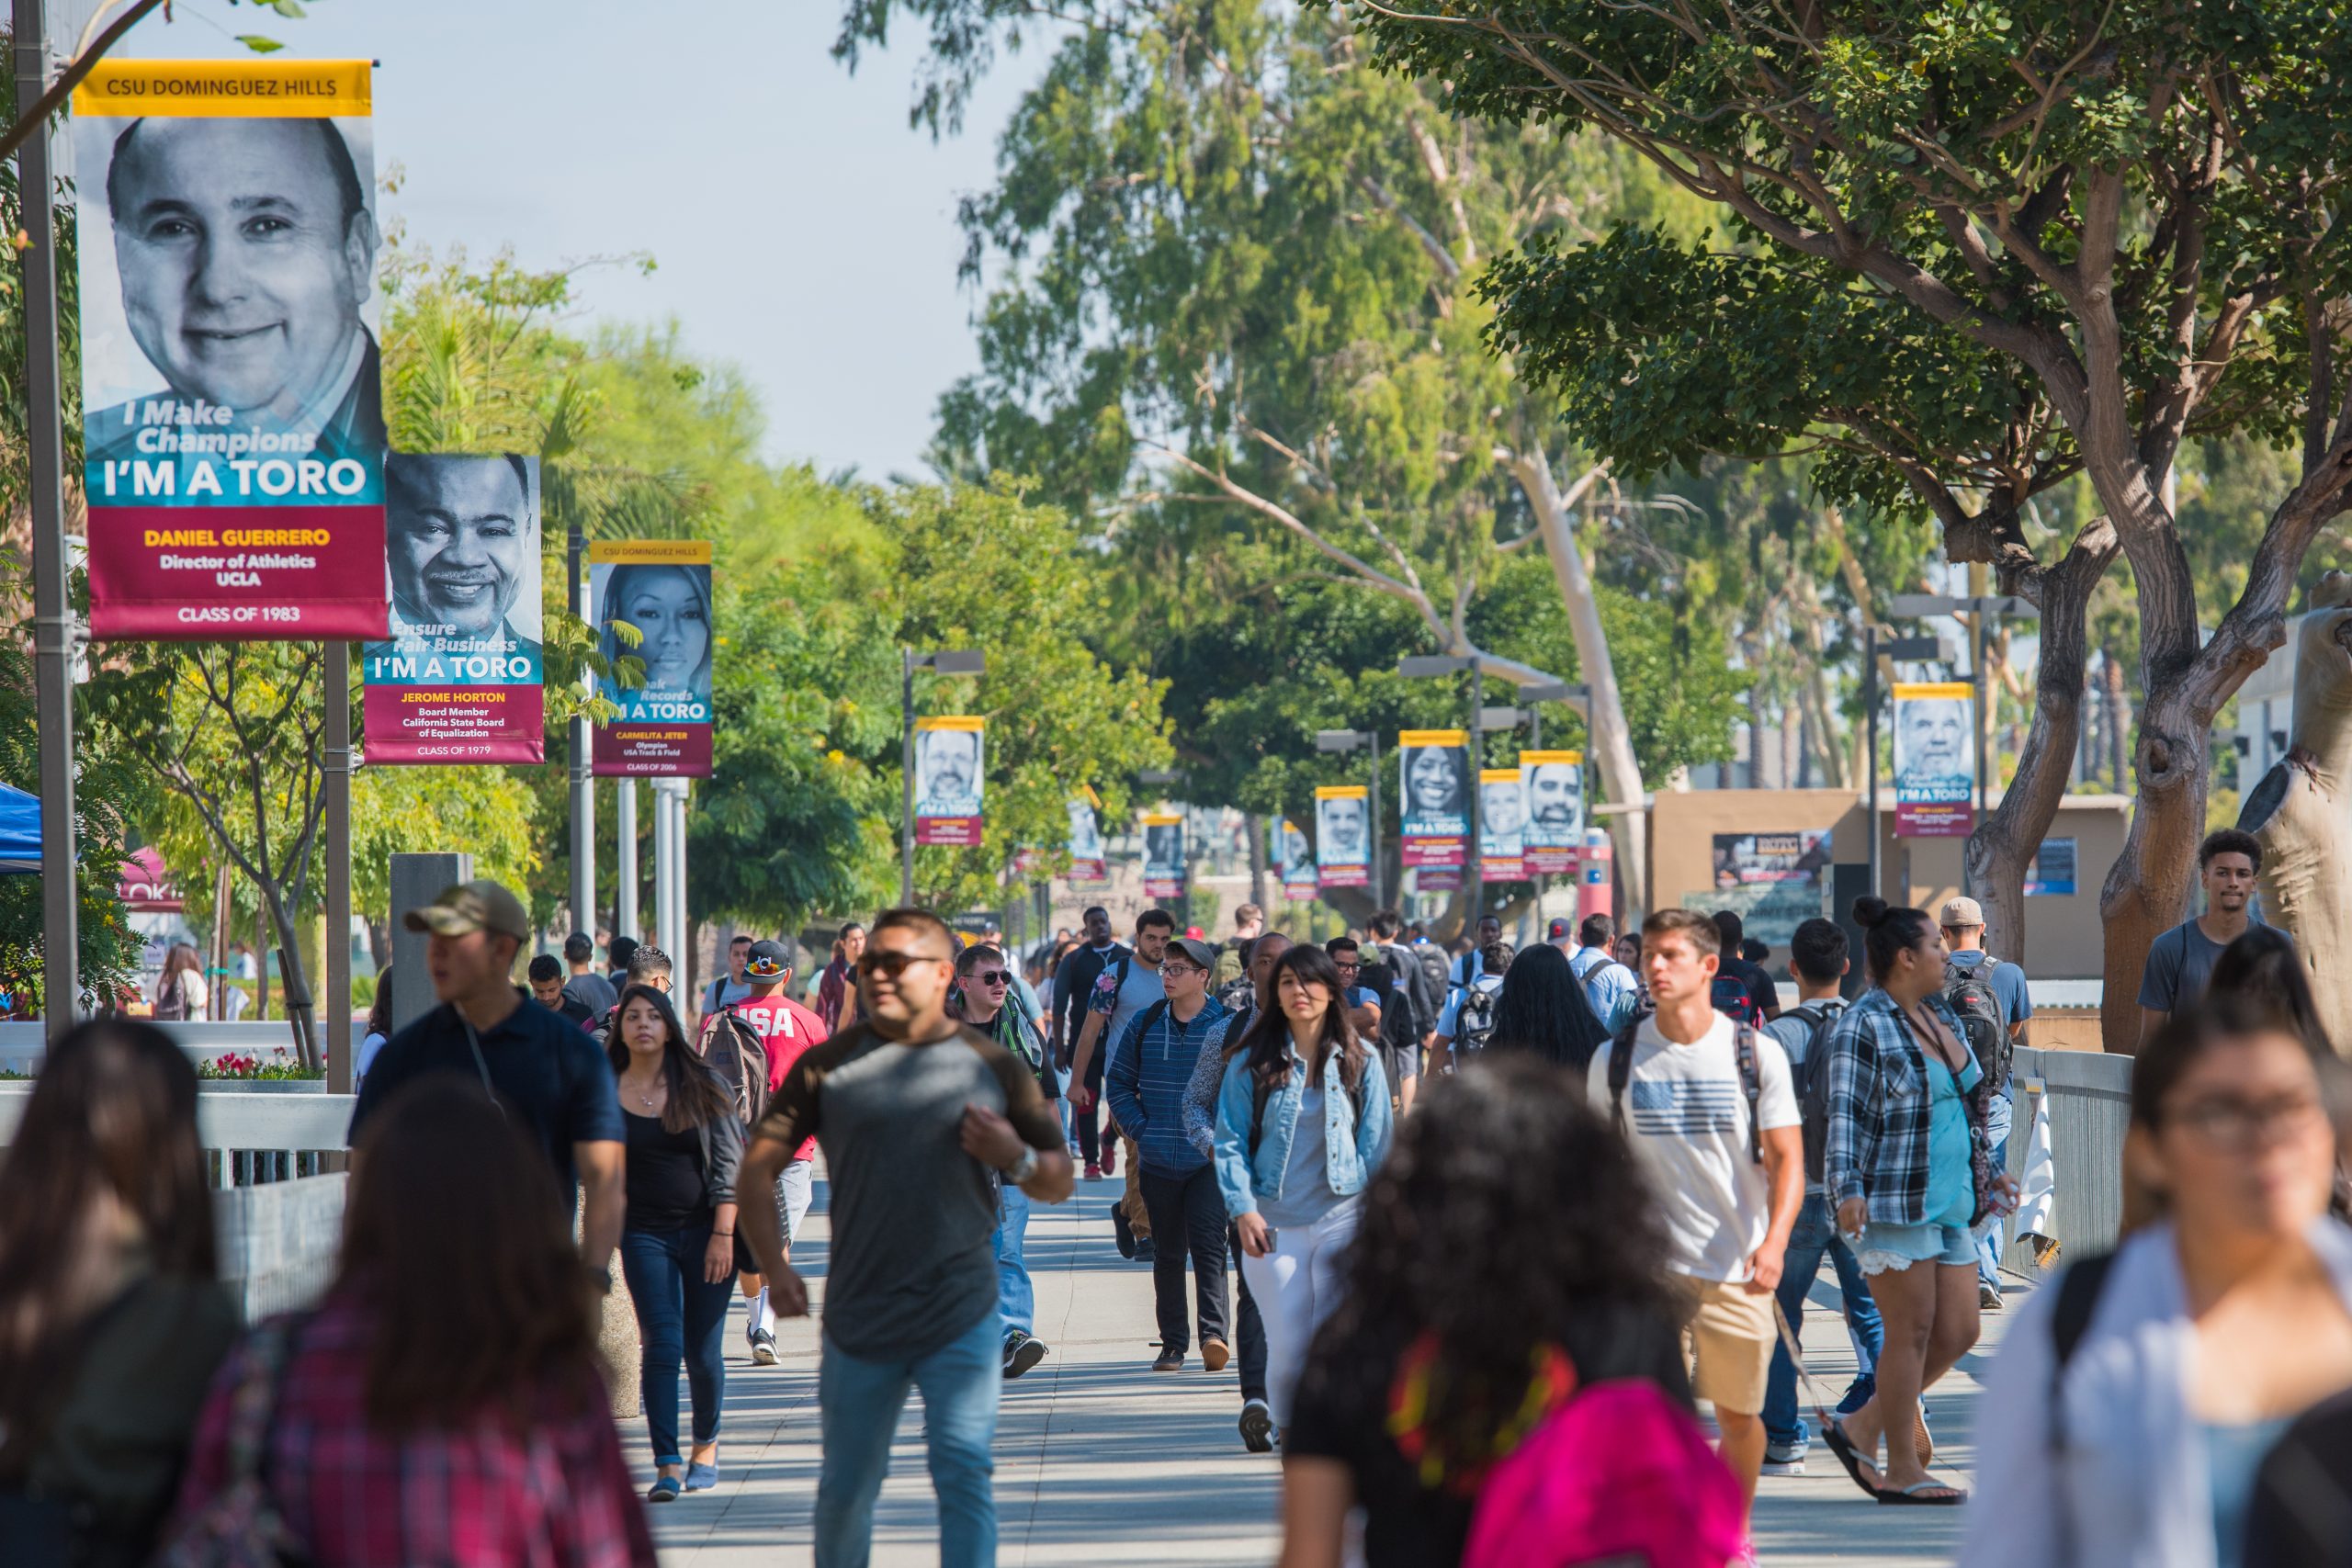 Students and student life on the first day of classes for the Fall 2016 semester at California State University Dominguez Hills